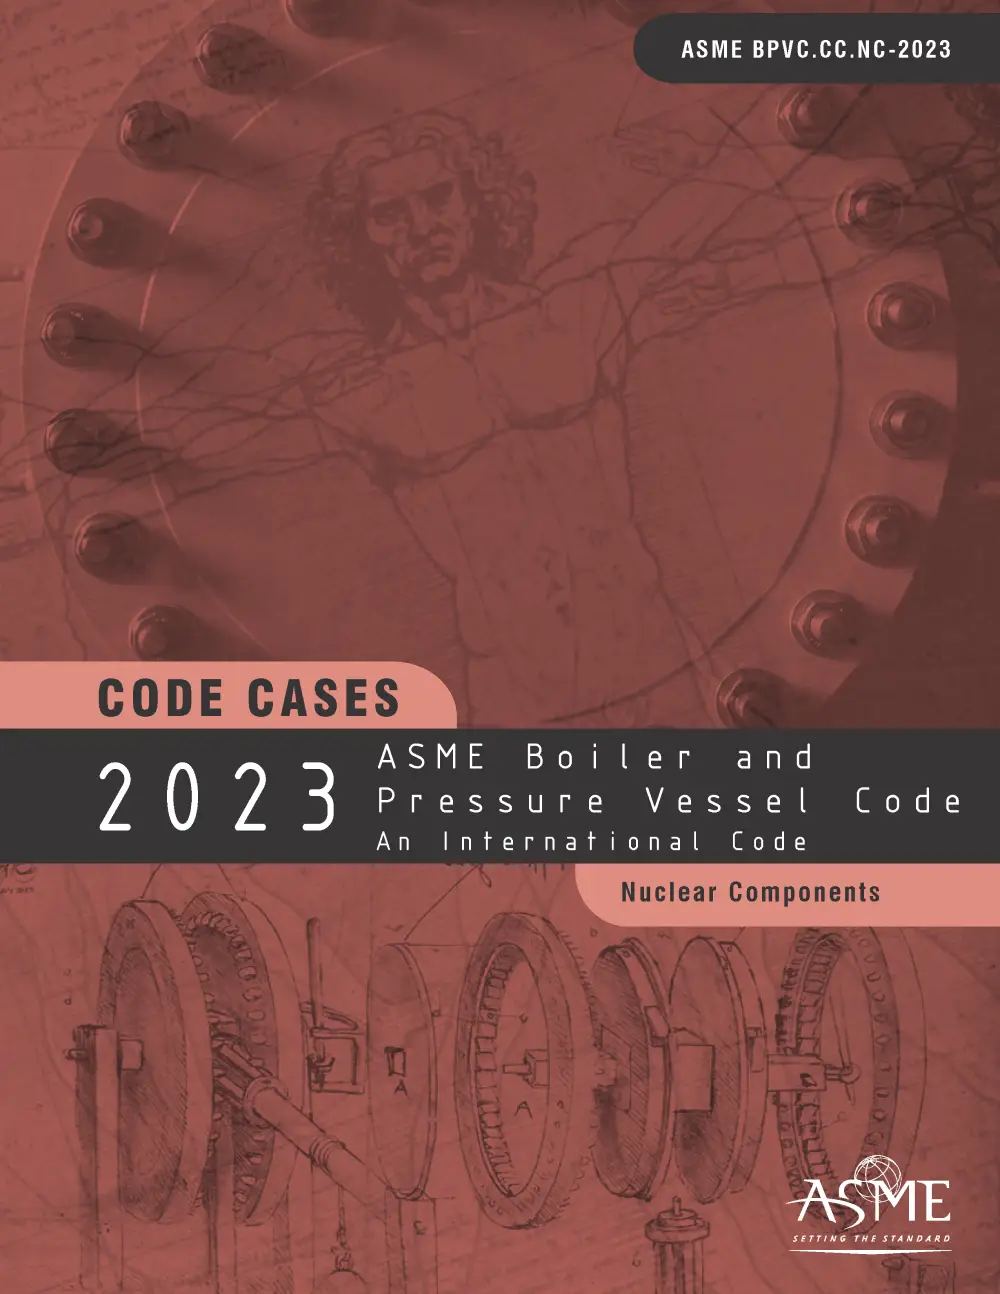 ASME BPVC Code Cases Nuclear Components